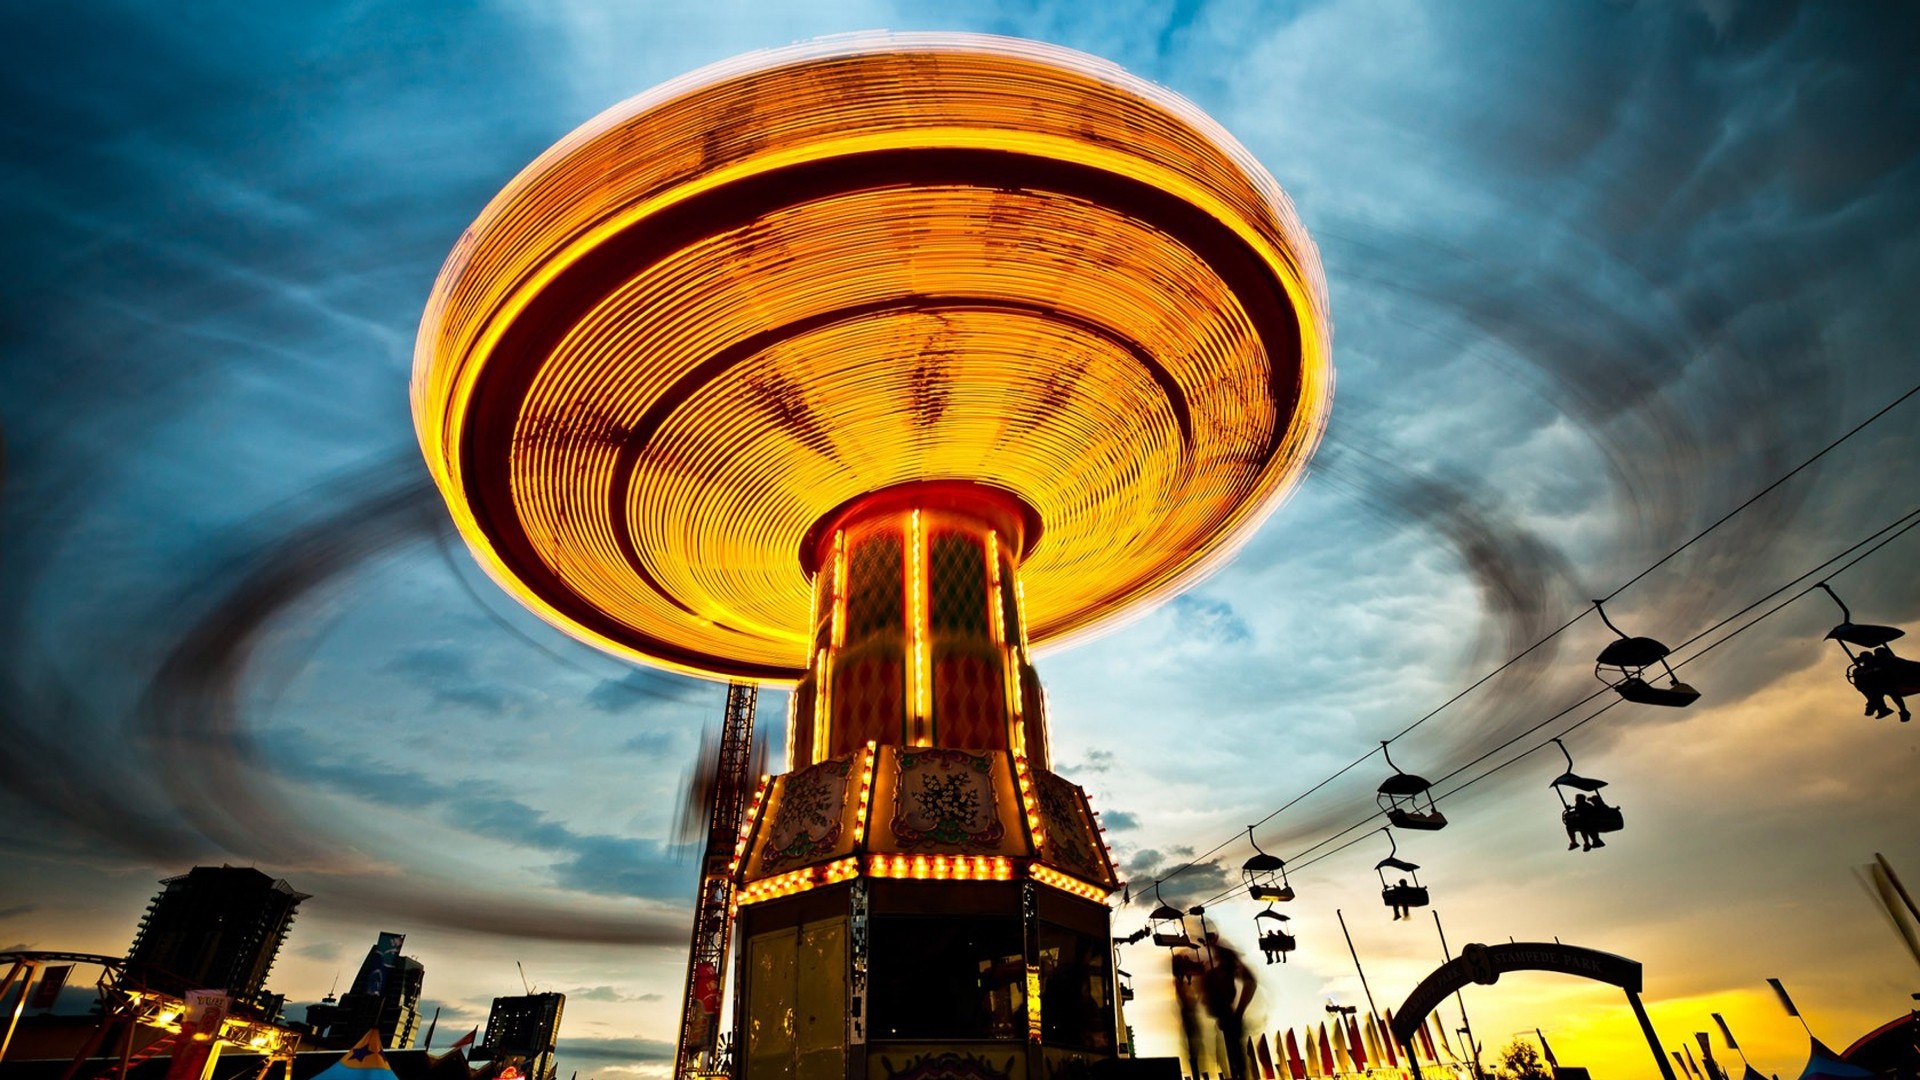 French, Sky, Clouds, Lights, Sunset, Motion blur, Long exposure, Theme parks Wallpaper